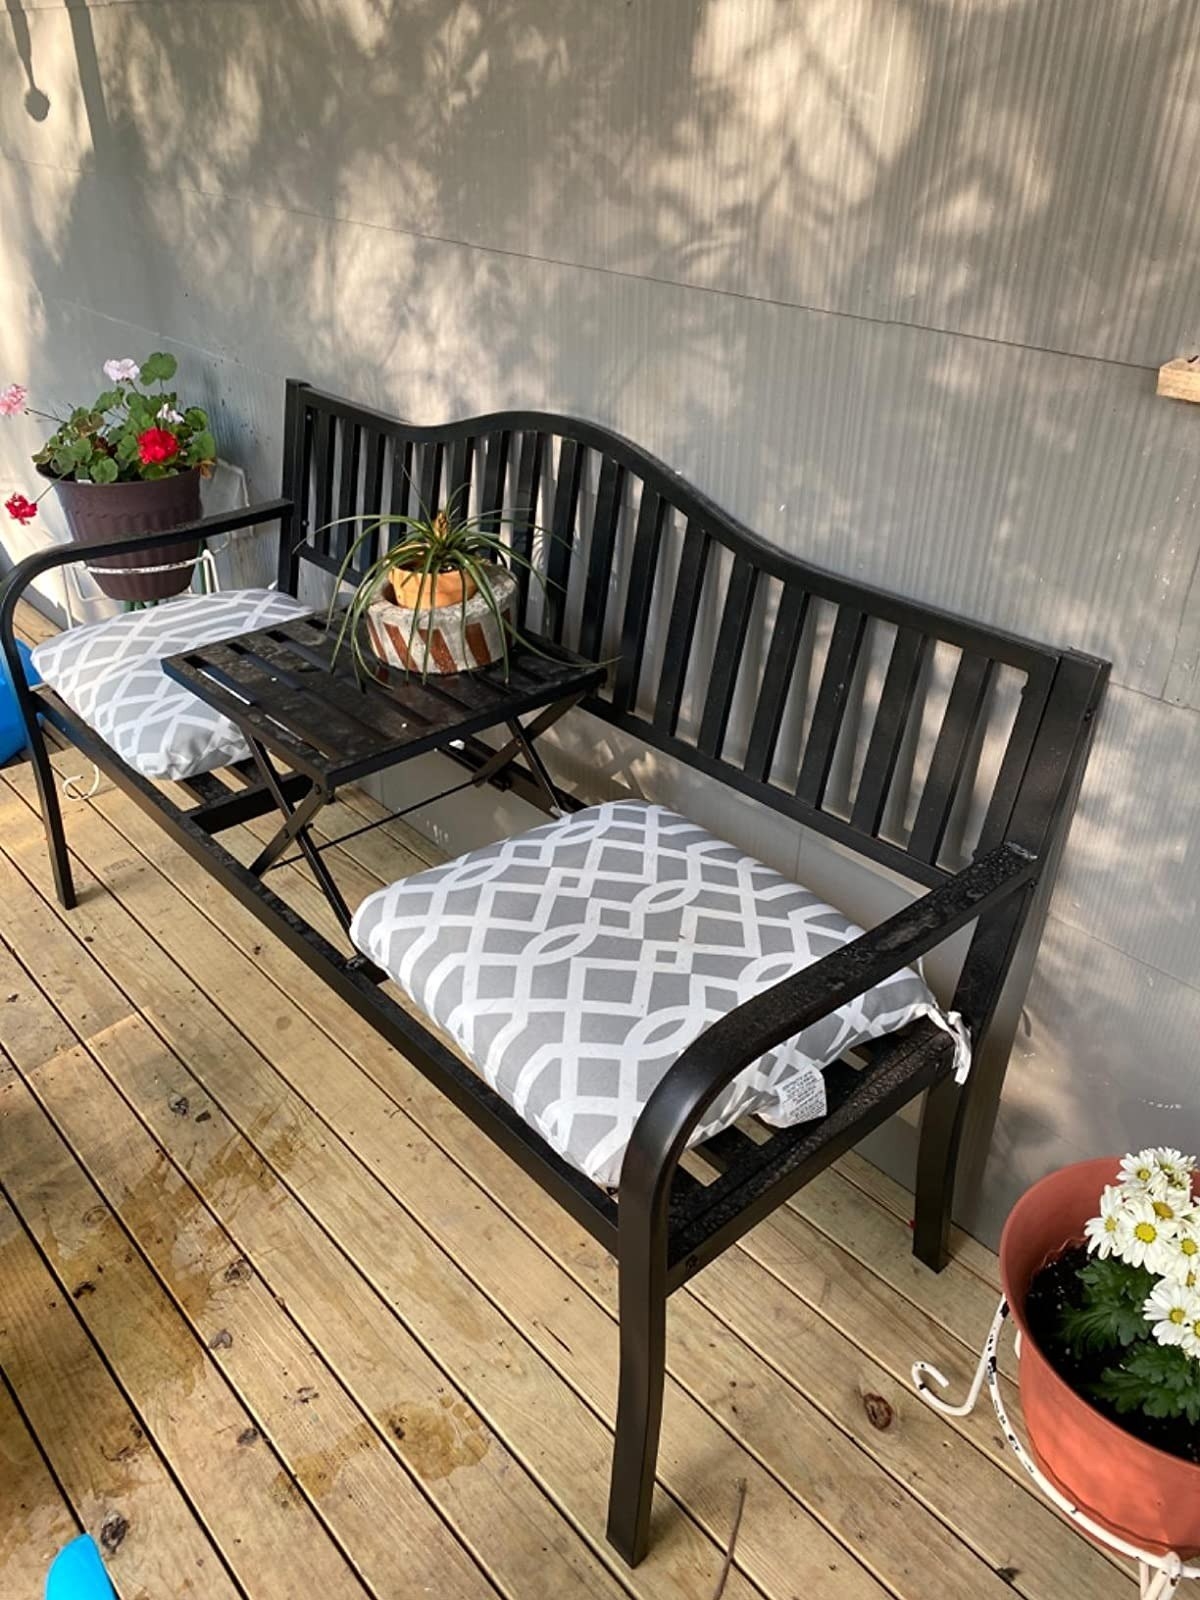 the outdoor bench with gray and white patterned cushions